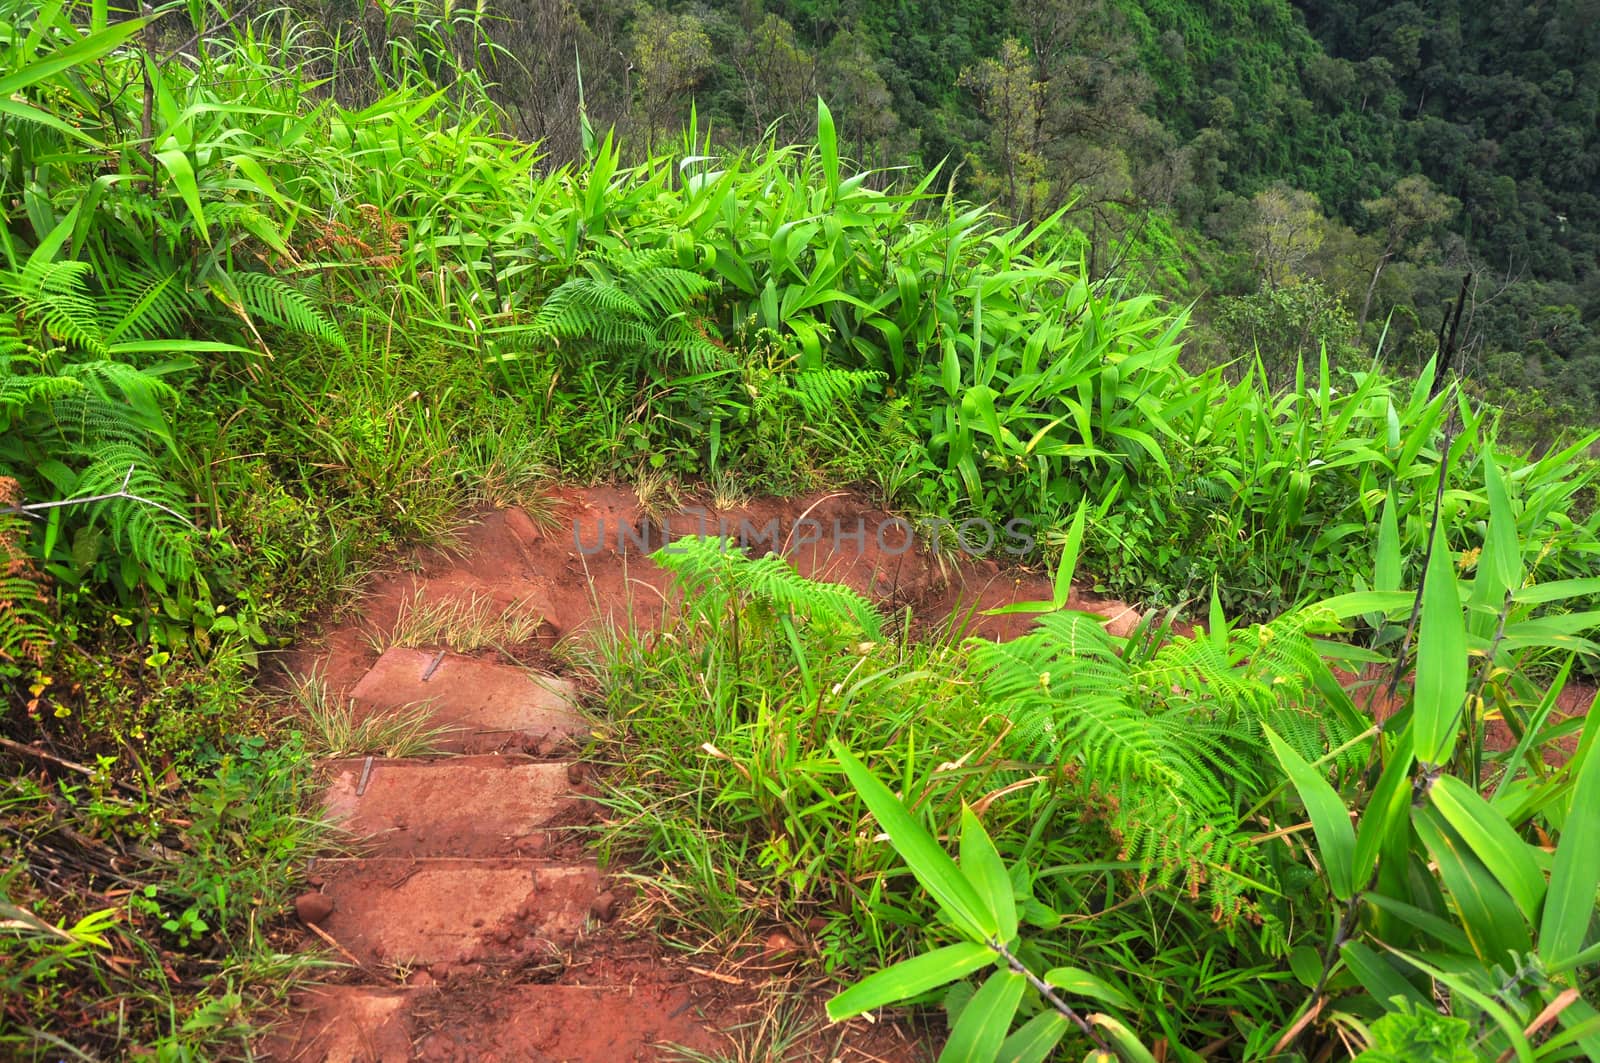 Downhill path With green trees growing on both sides, Phu Soi Dao national park, Thailand